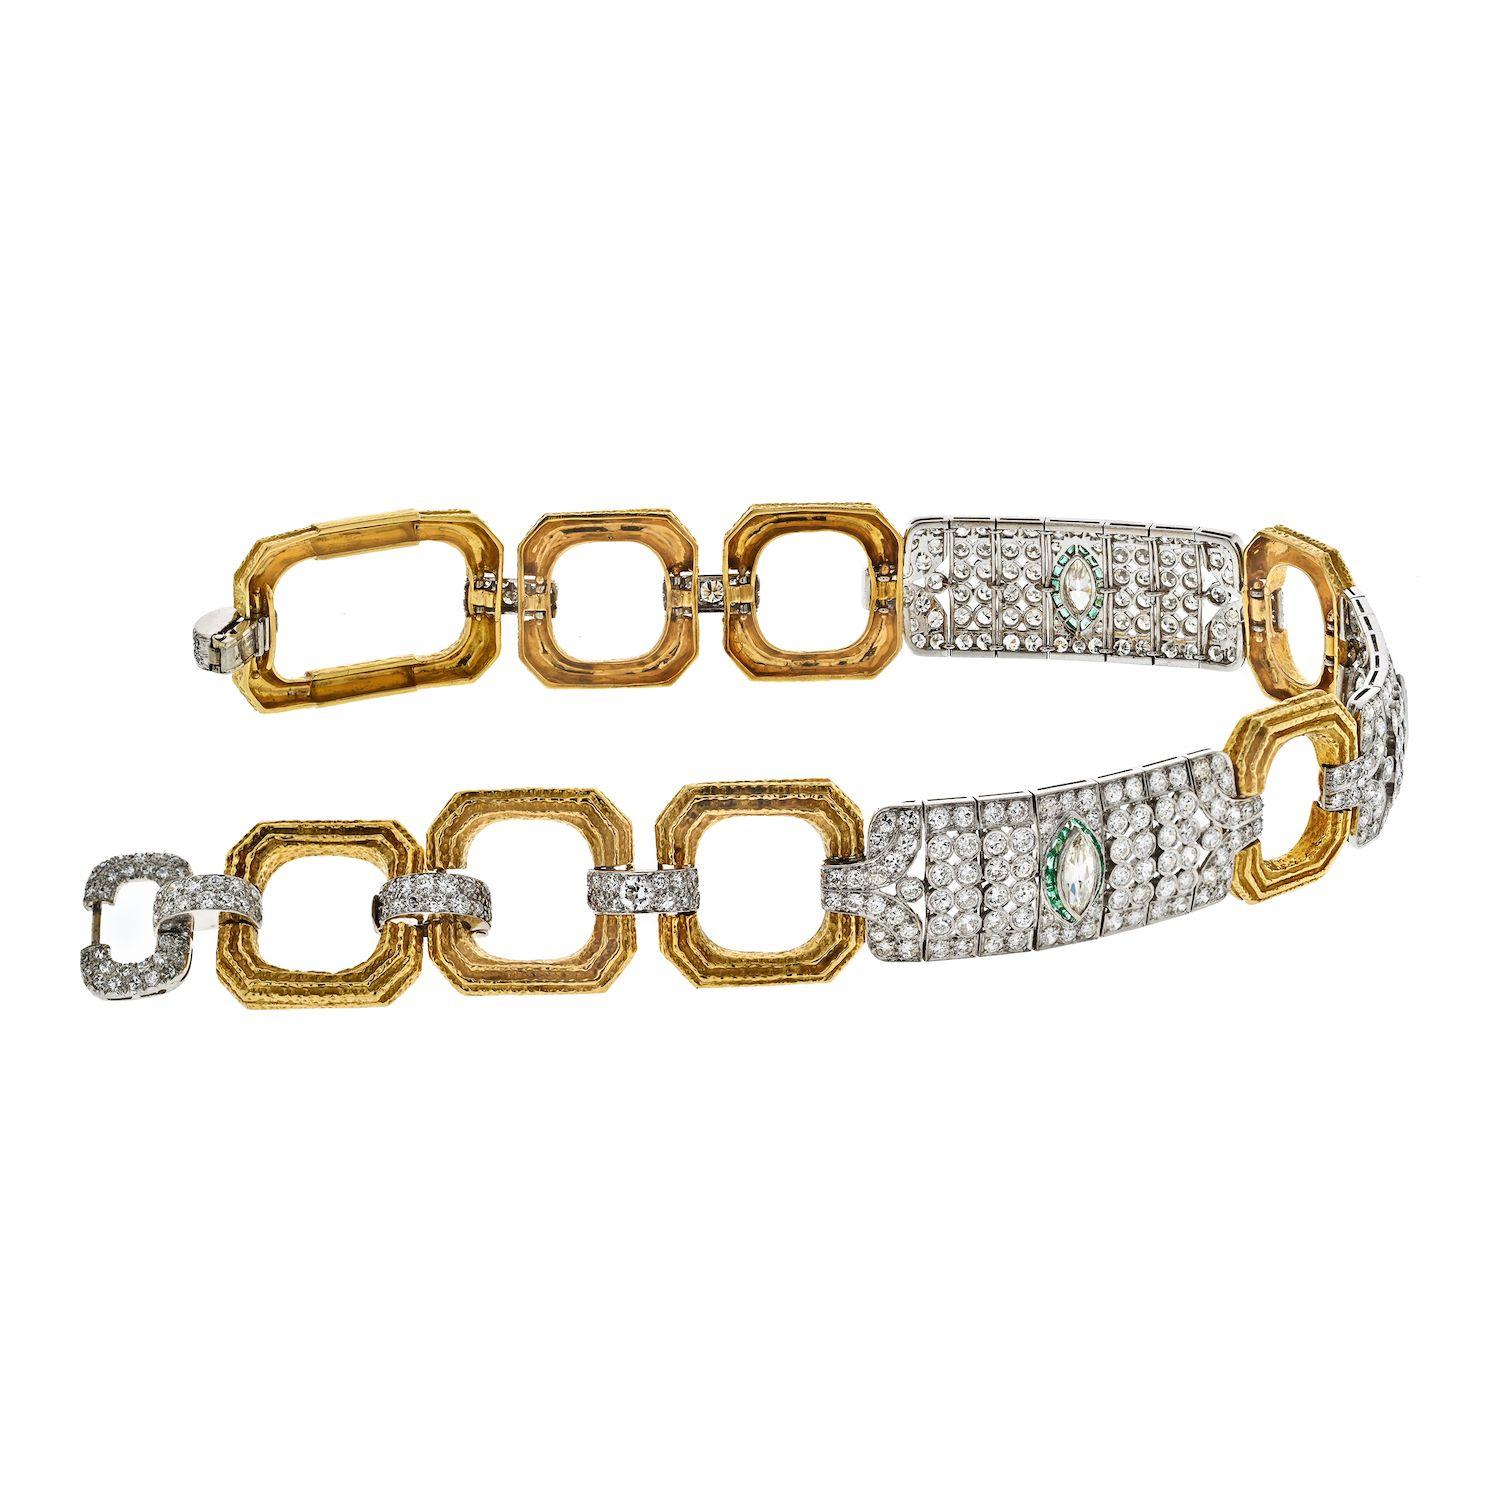 The David Webb collar necklace is a breathtaking piece of jewelry that exemplifies the exquisite craftsmanship and luxurious design for which the brand is renowned. Crafted in a combination of platinum and gold, this necklace is adorned with round